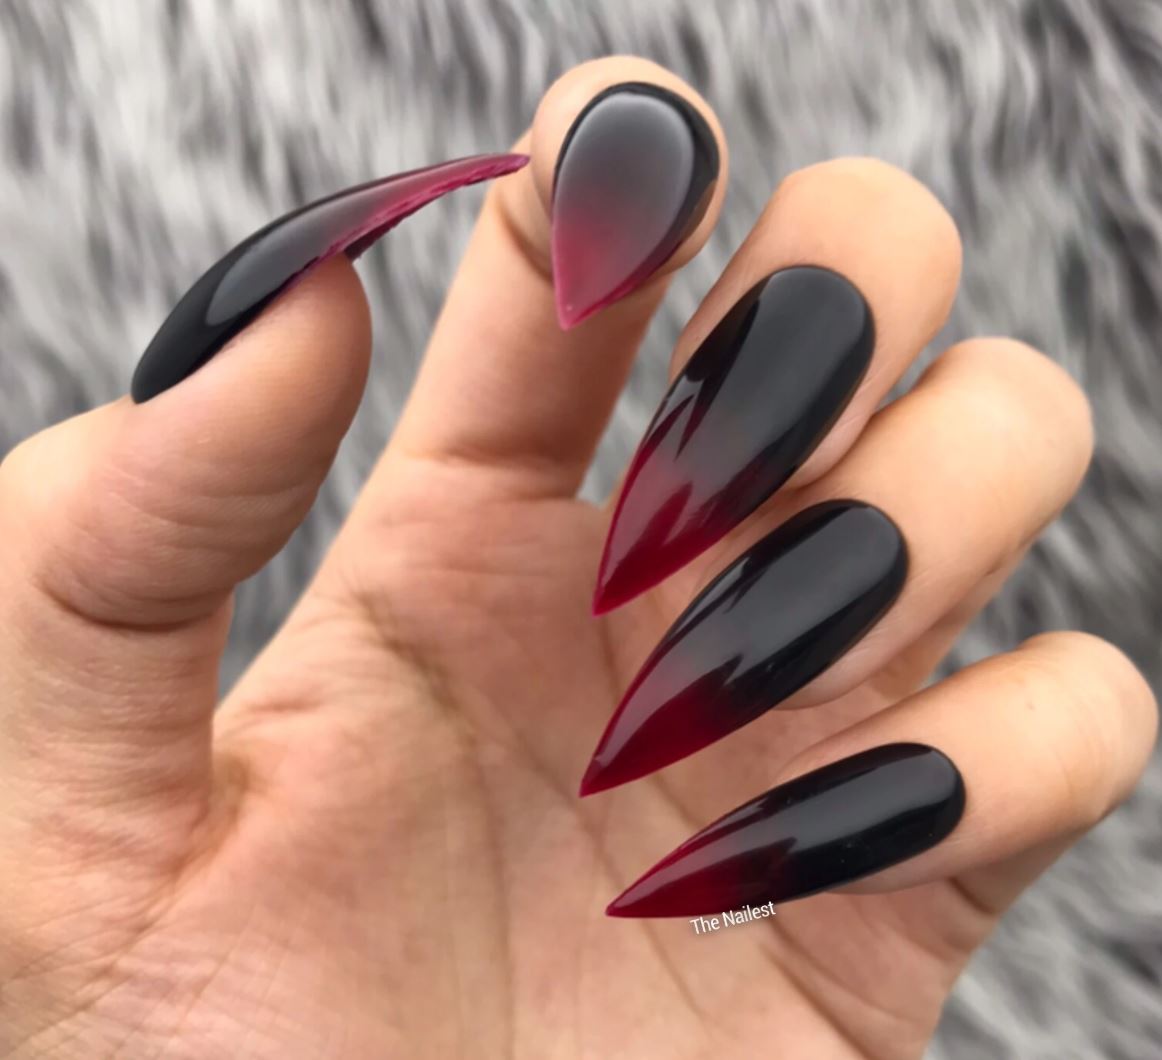 70 Glamorous Ombre Nails Designs That Will Look Fabulous